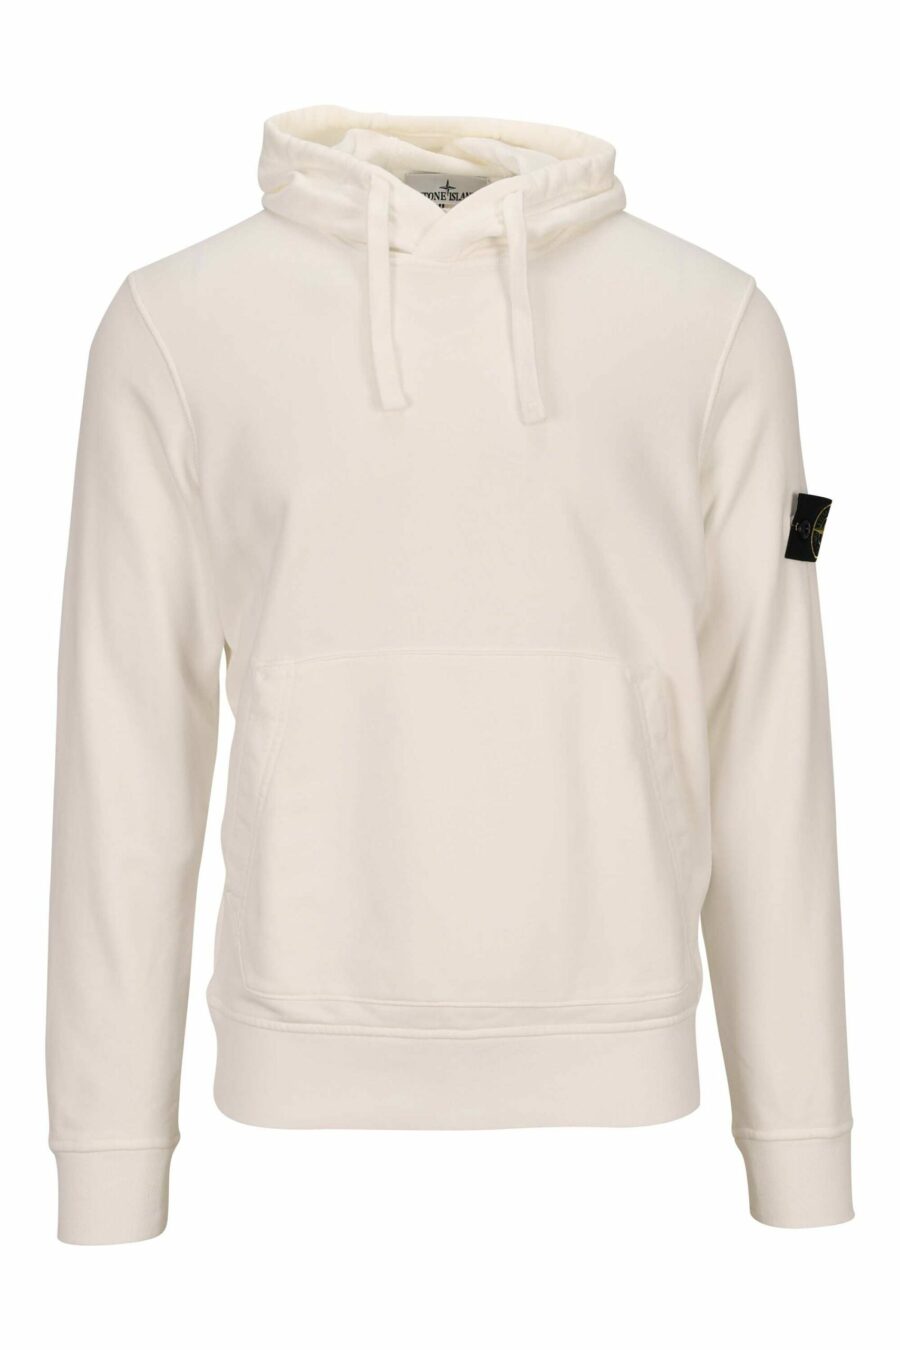 White hooded sweatshirt with compass logo patch - 8052572854187 scaled